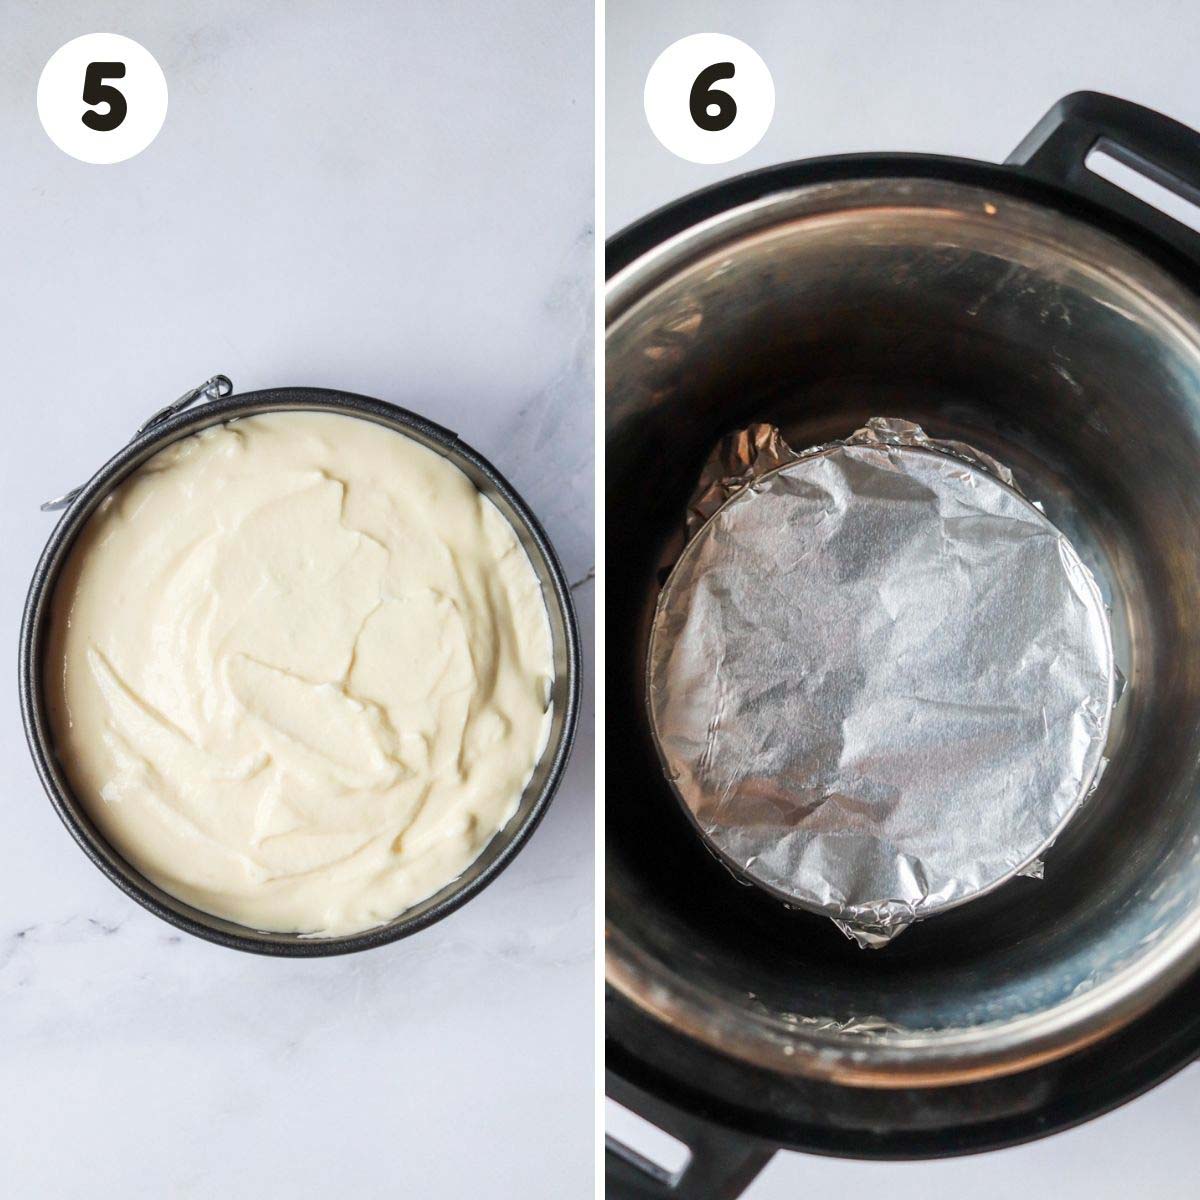 two image process making Instant Pot low carb cheesecake.